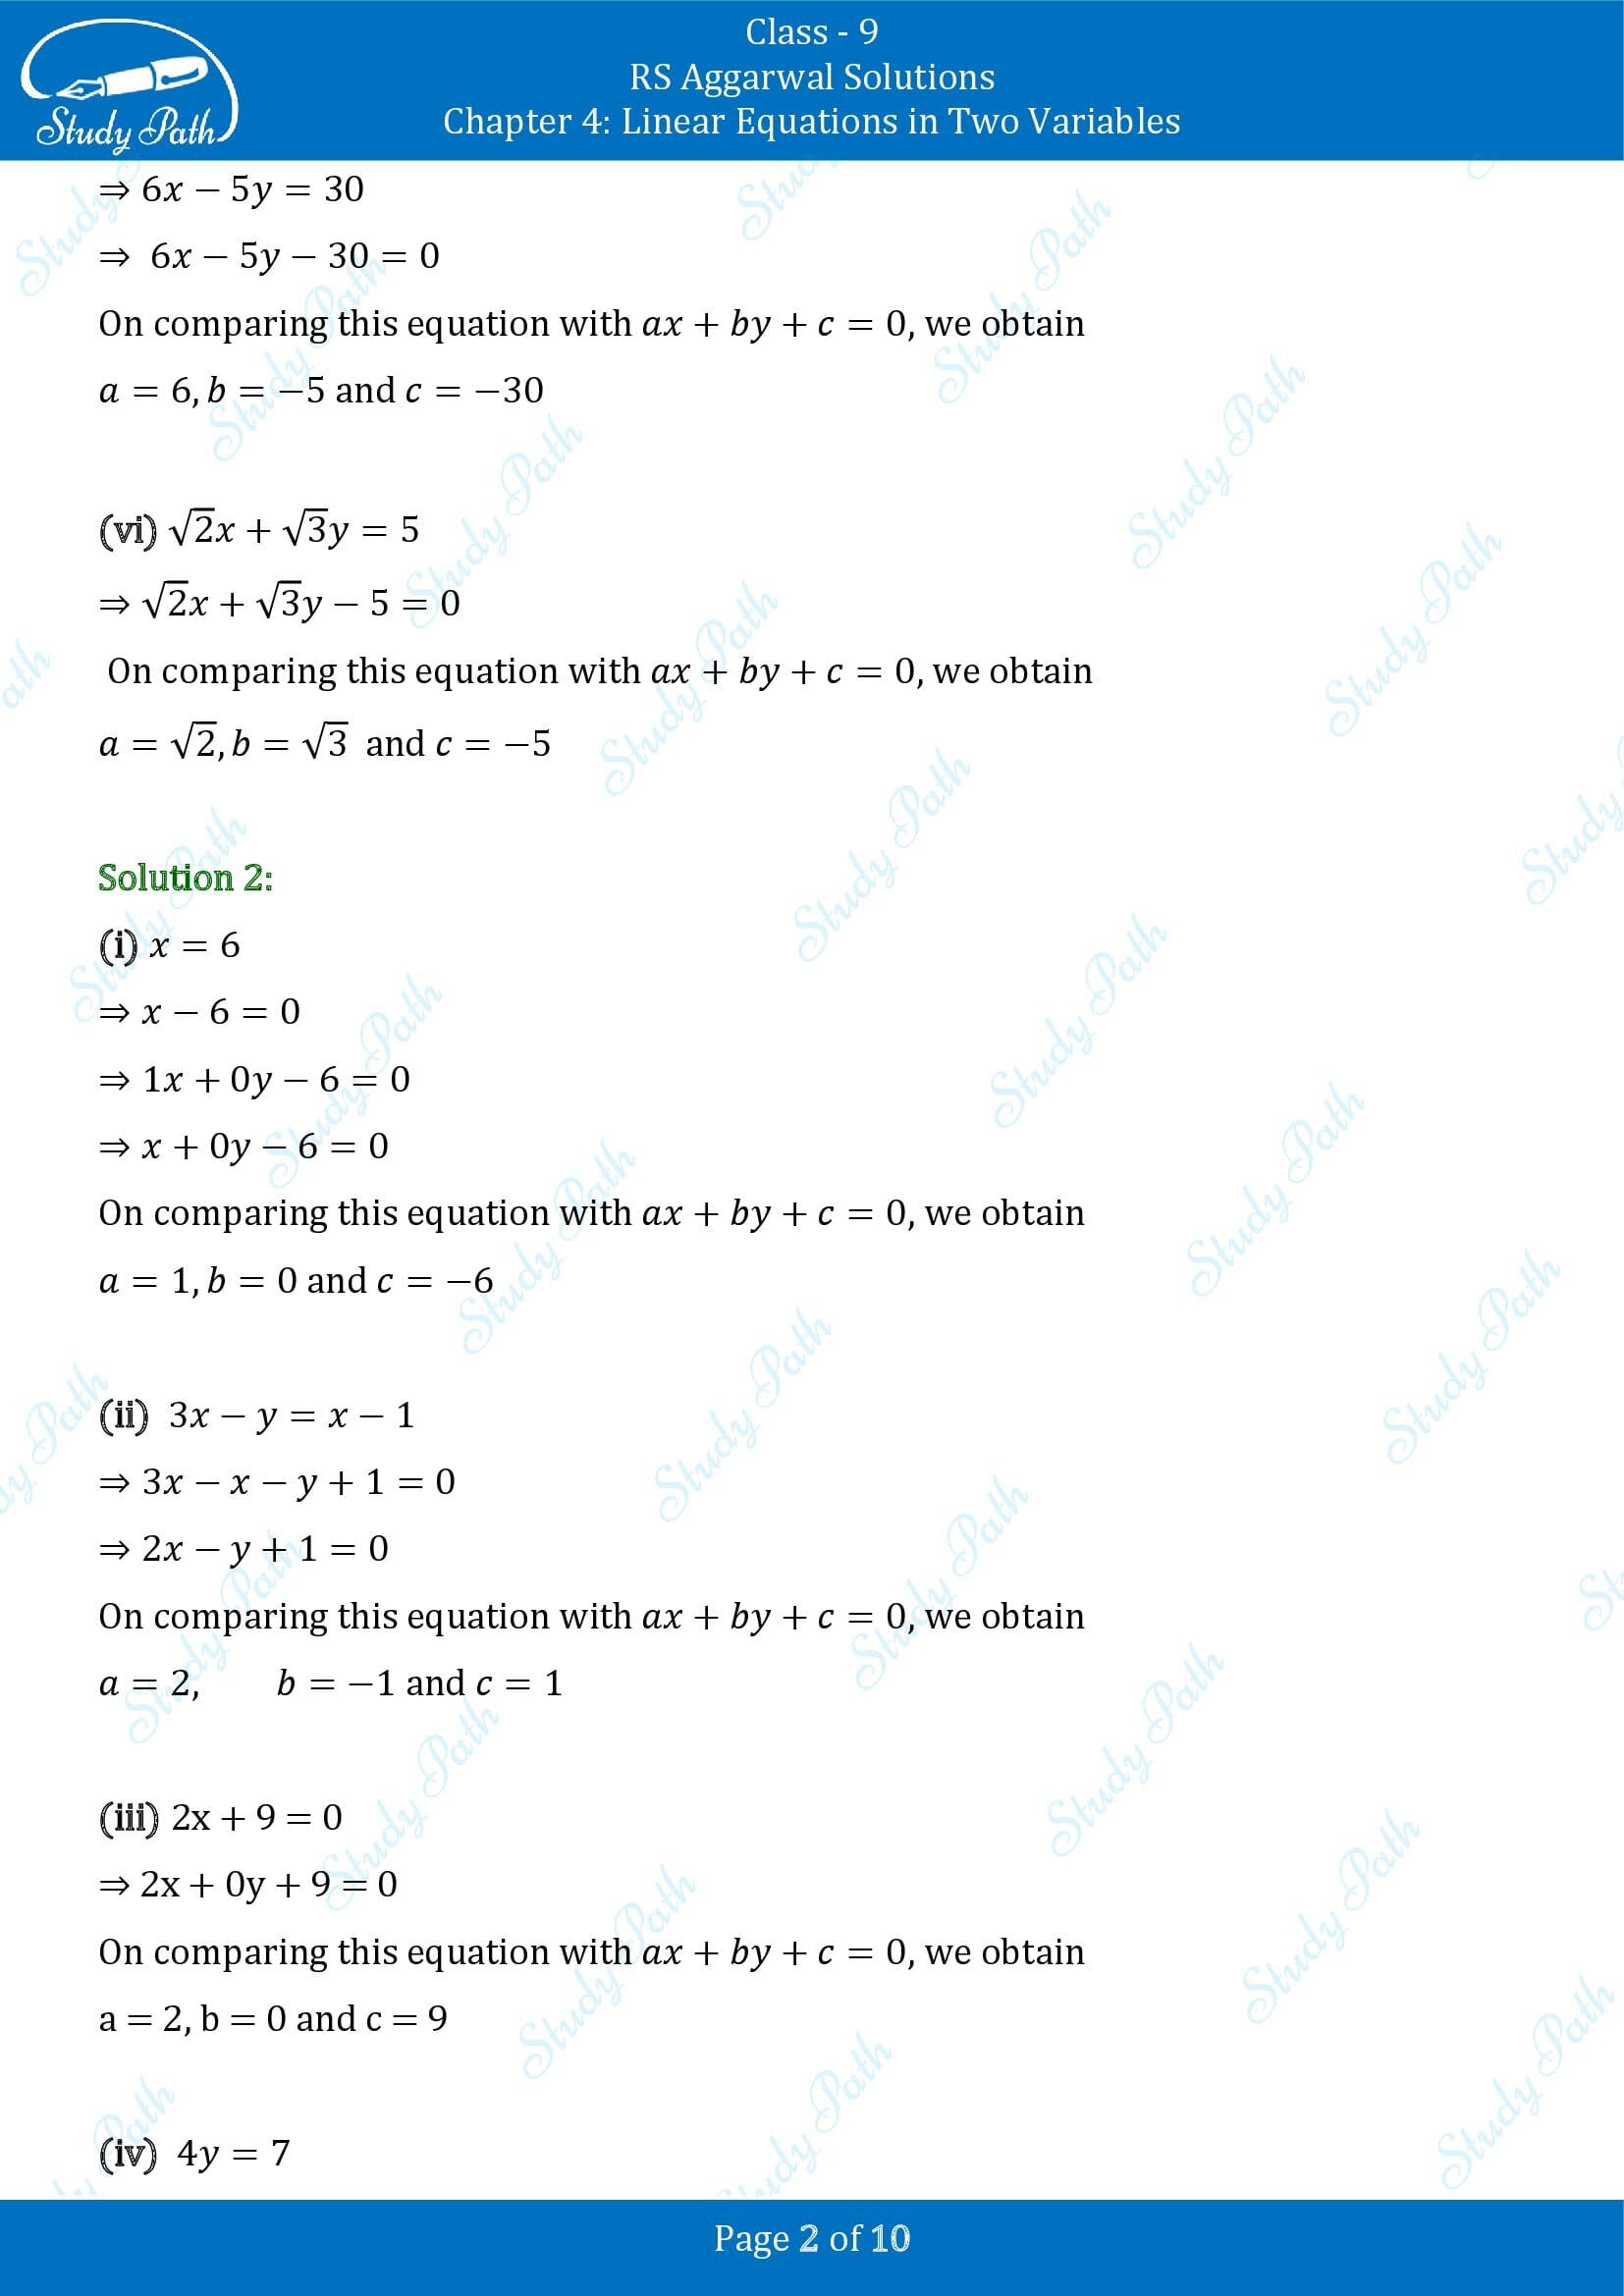 RS Aggarwal Solutions Class 9 Chapter 4 Linear Equations in Two Variables Exercise 4A 0002